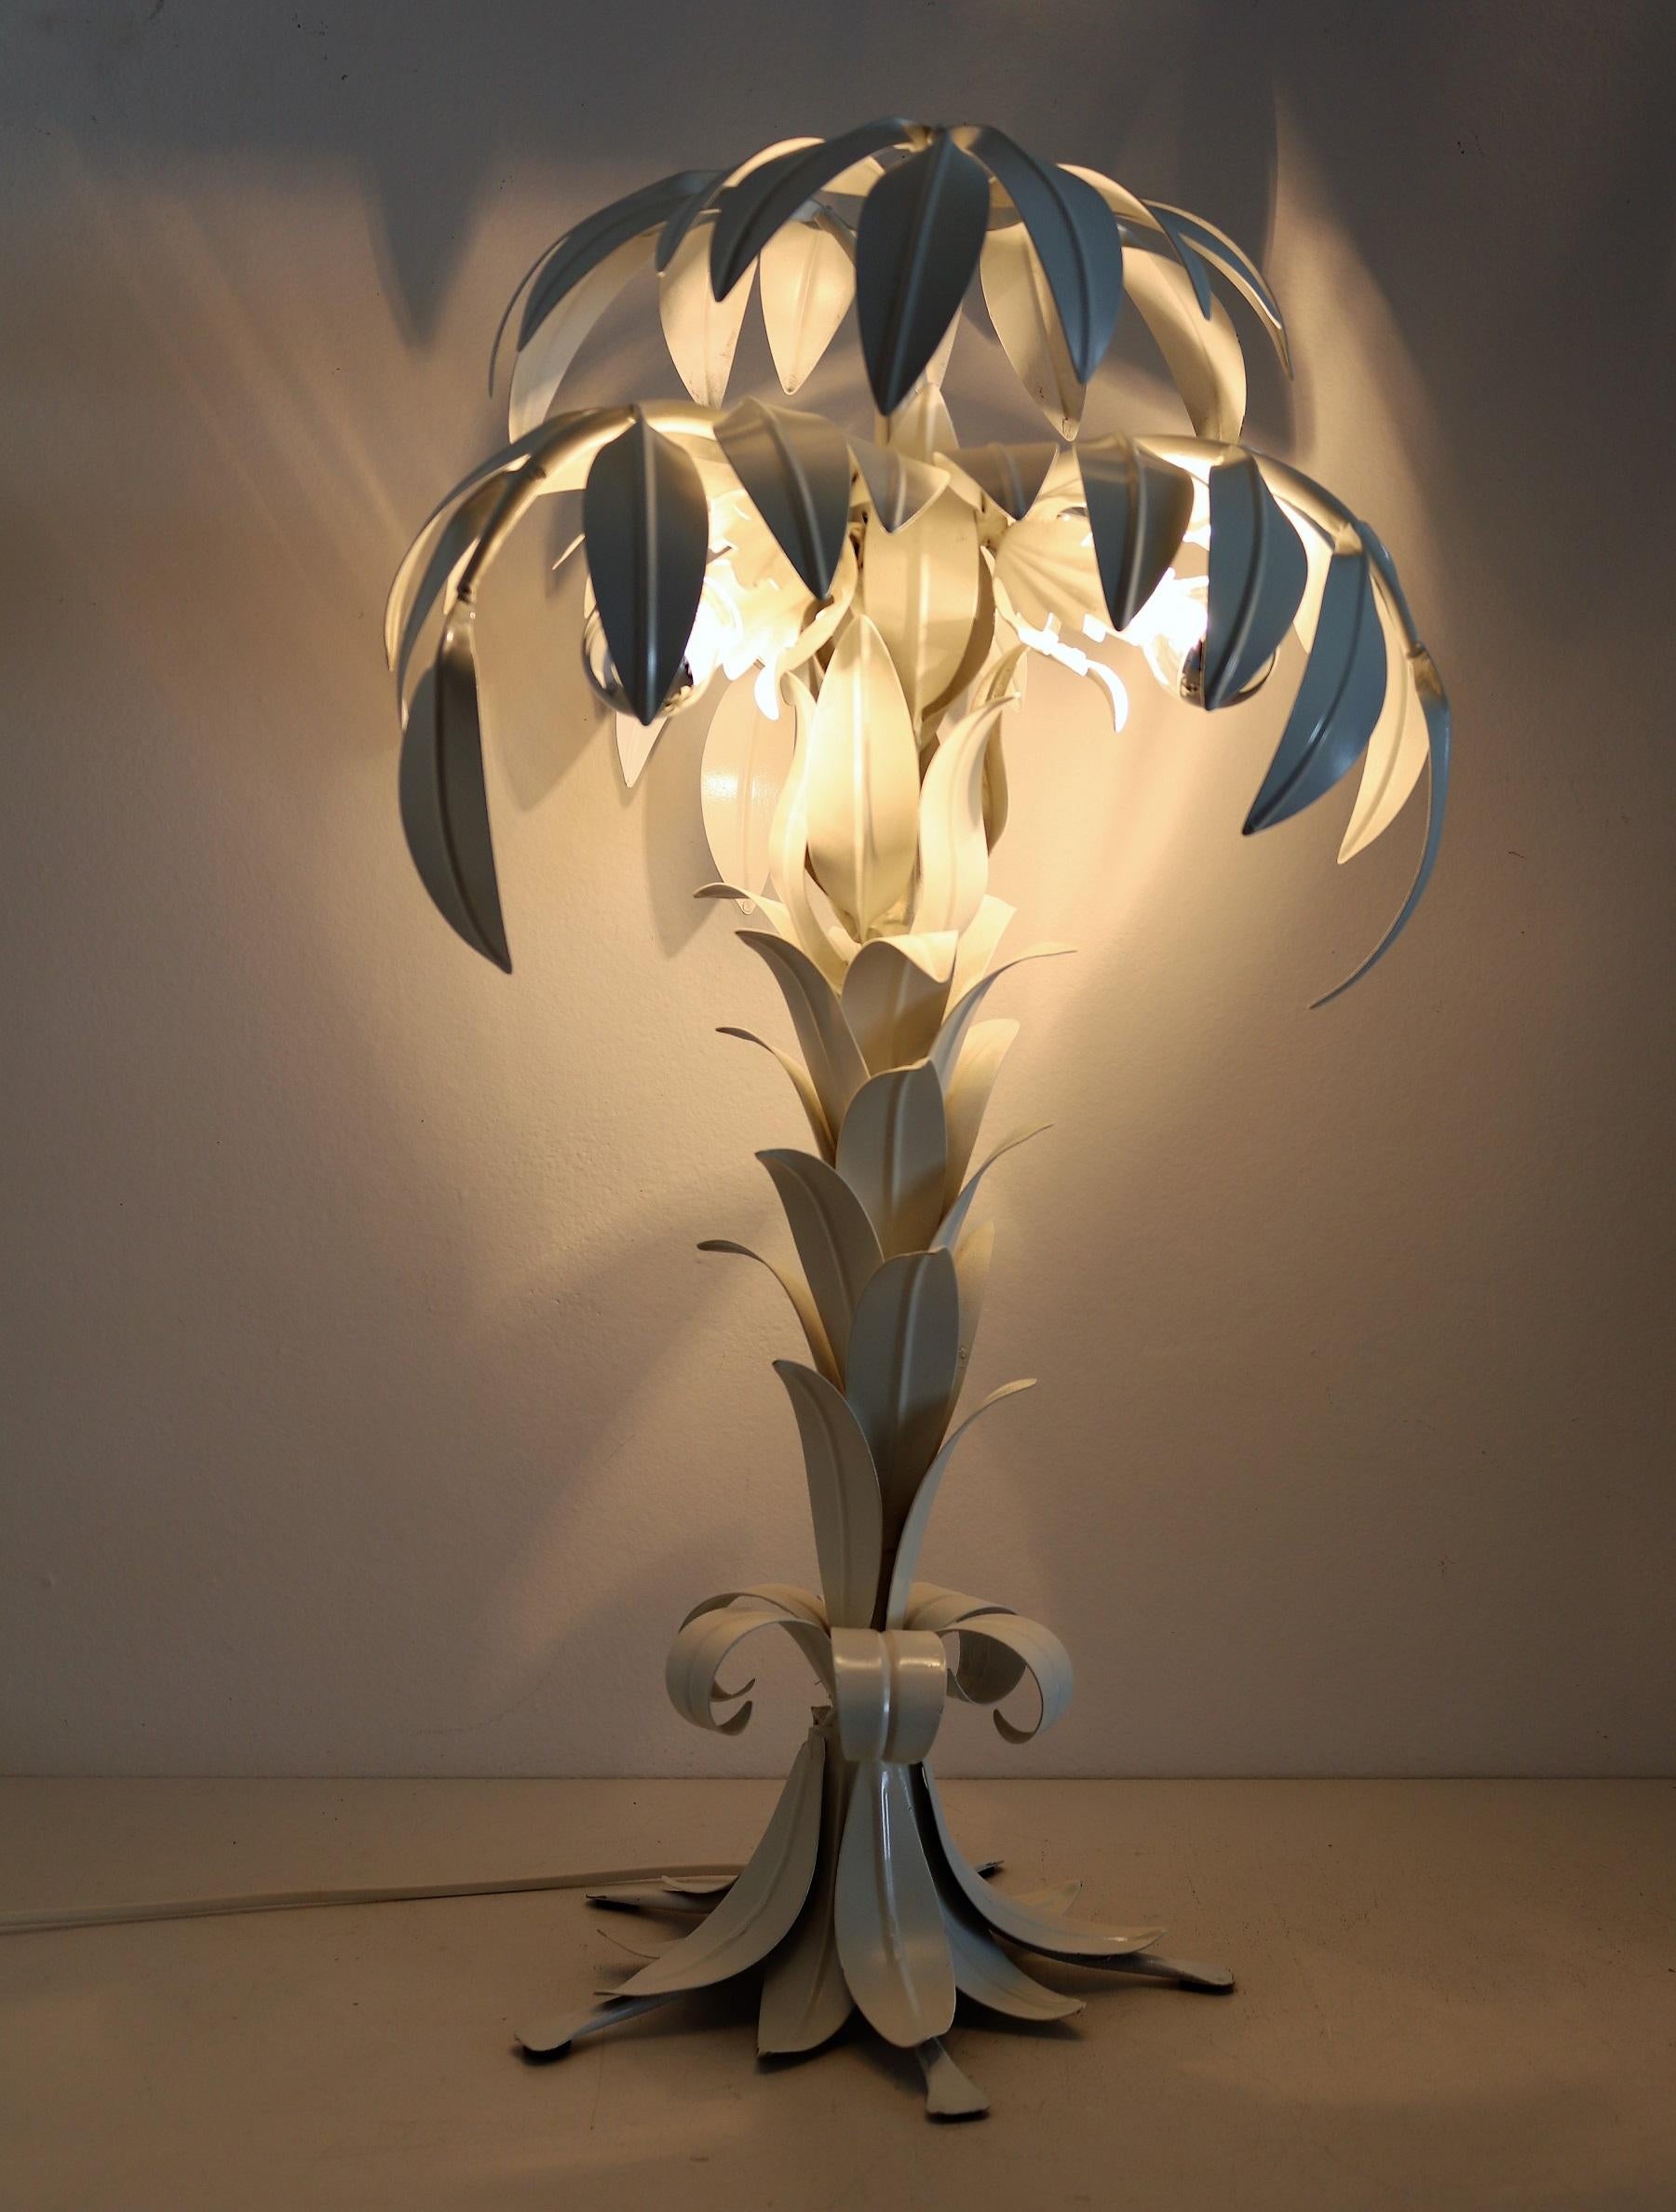 Gorgeous palm tree table lamp in white color by Hans Kögl (Koegl) with three small light sockets.
Made in Italy.
Wonderful eye-catcher in any Boho and Hollywood Regency style interior.
Very good to excellent original condition.
Works with 4